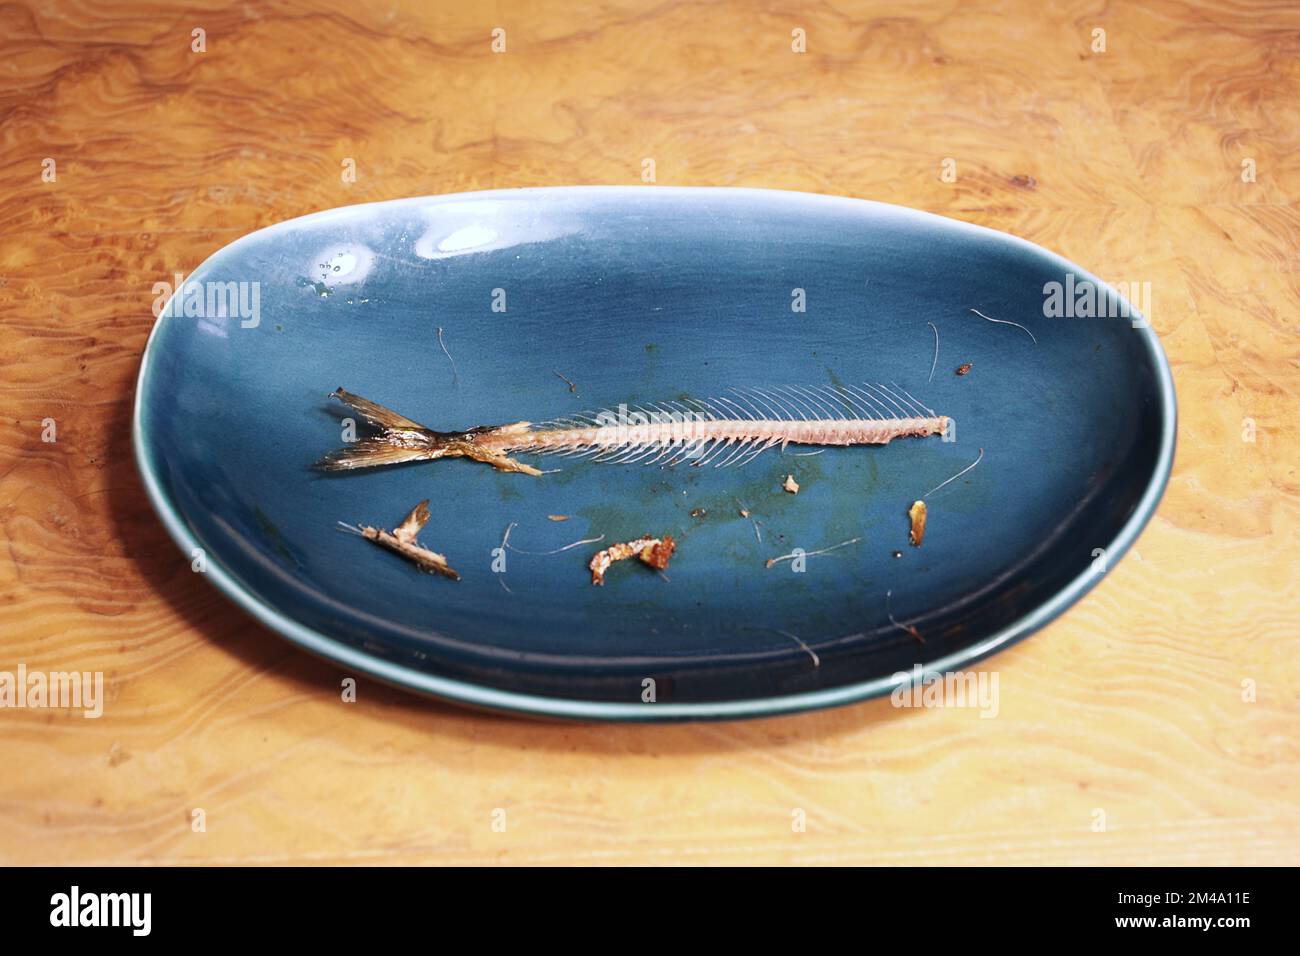 Close up of perfectly eaten pacific saury fish bone spine, ribs and tail in blue food plate. Healthy Japanese food Stock Photo